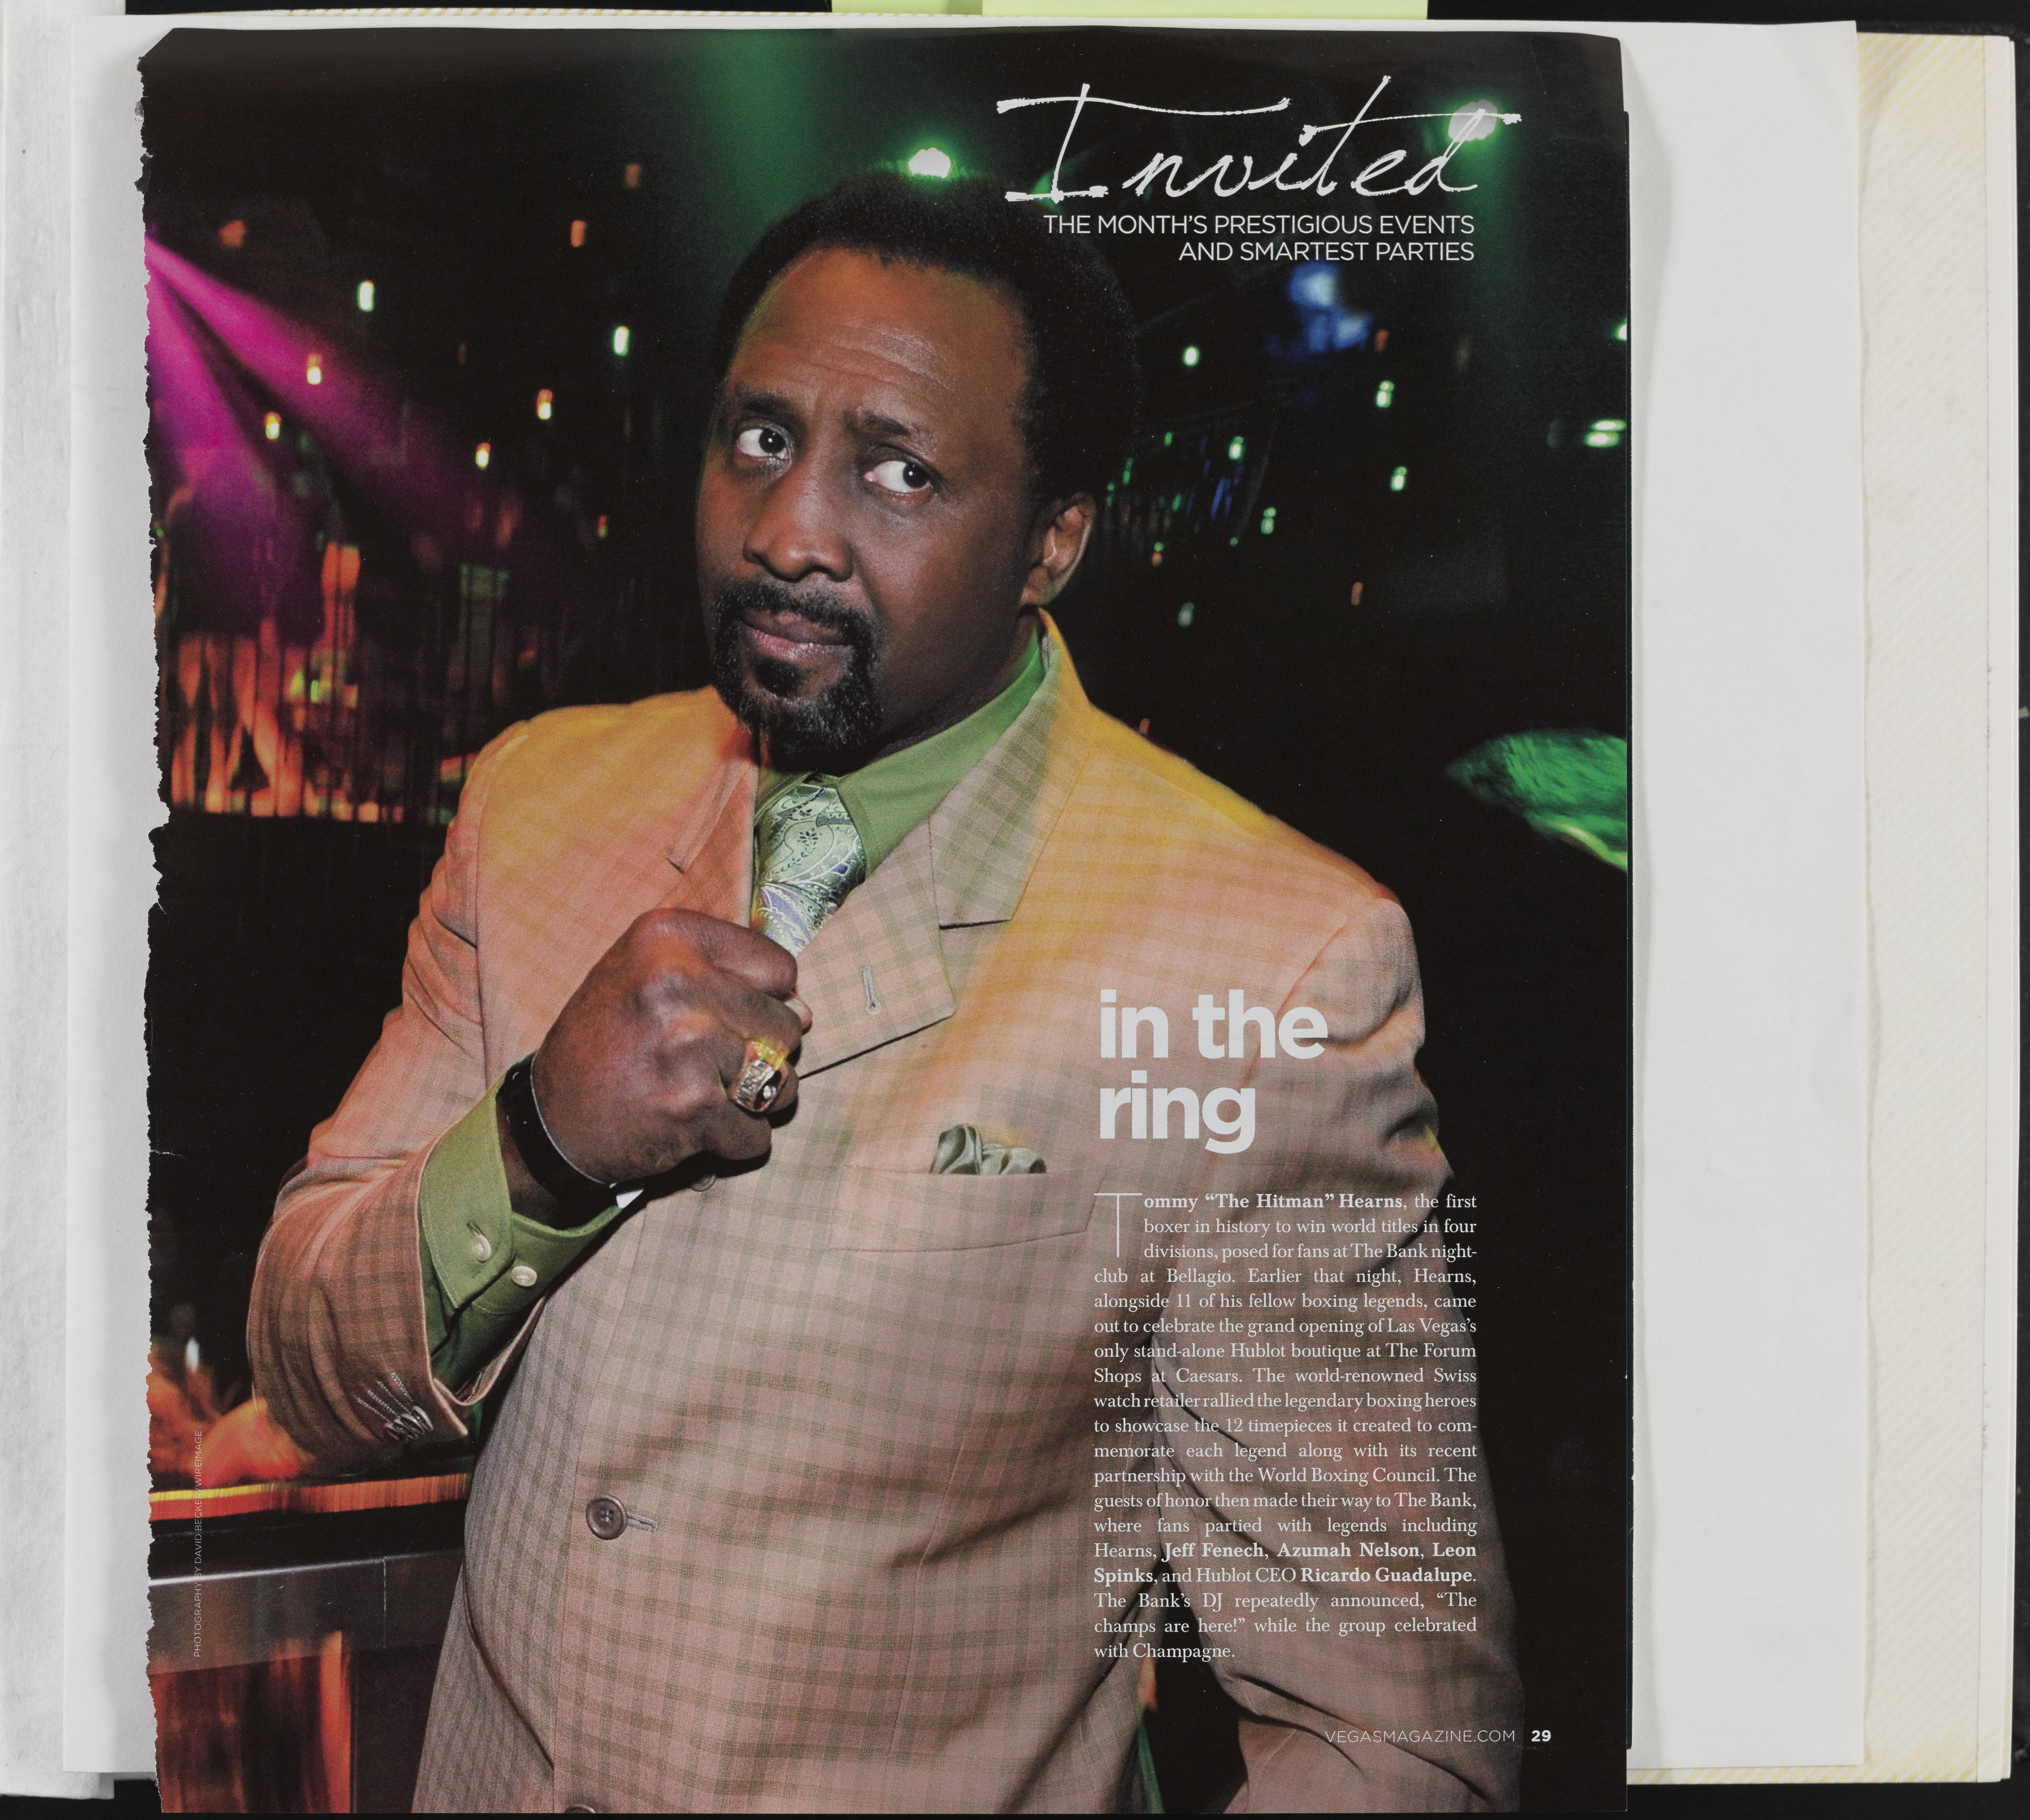 Magazine clipping with Tommy Hearns